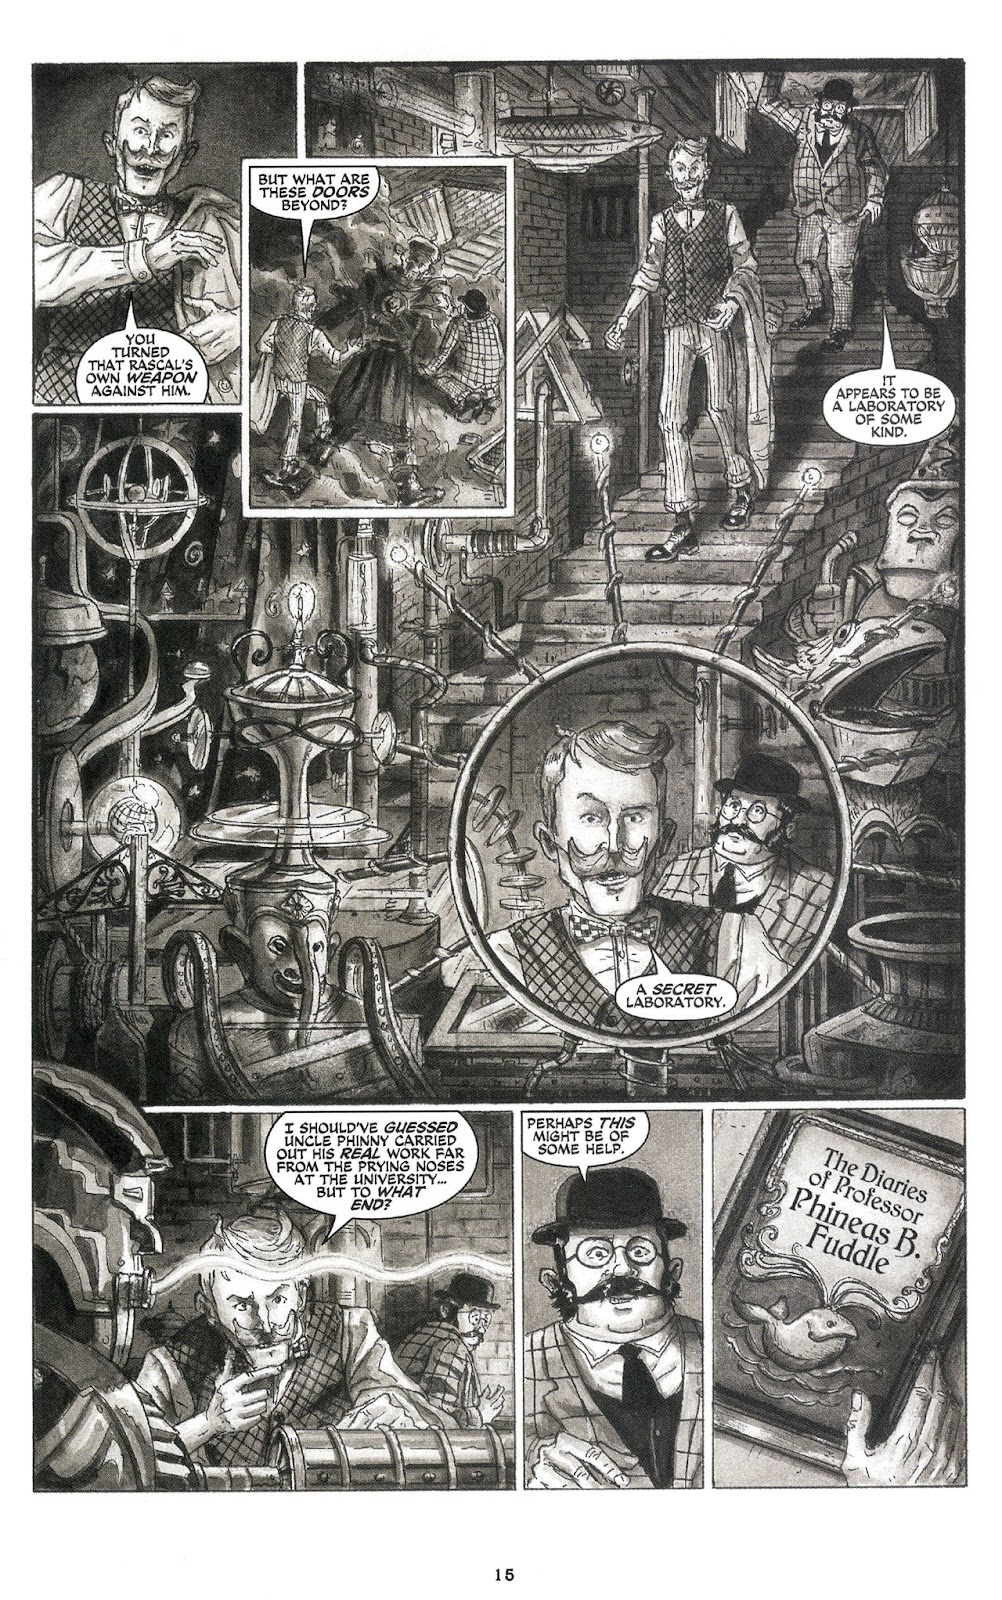 The Remarkable Worlds of Professor Phineas B. Fuddle issue 1 - Page 16